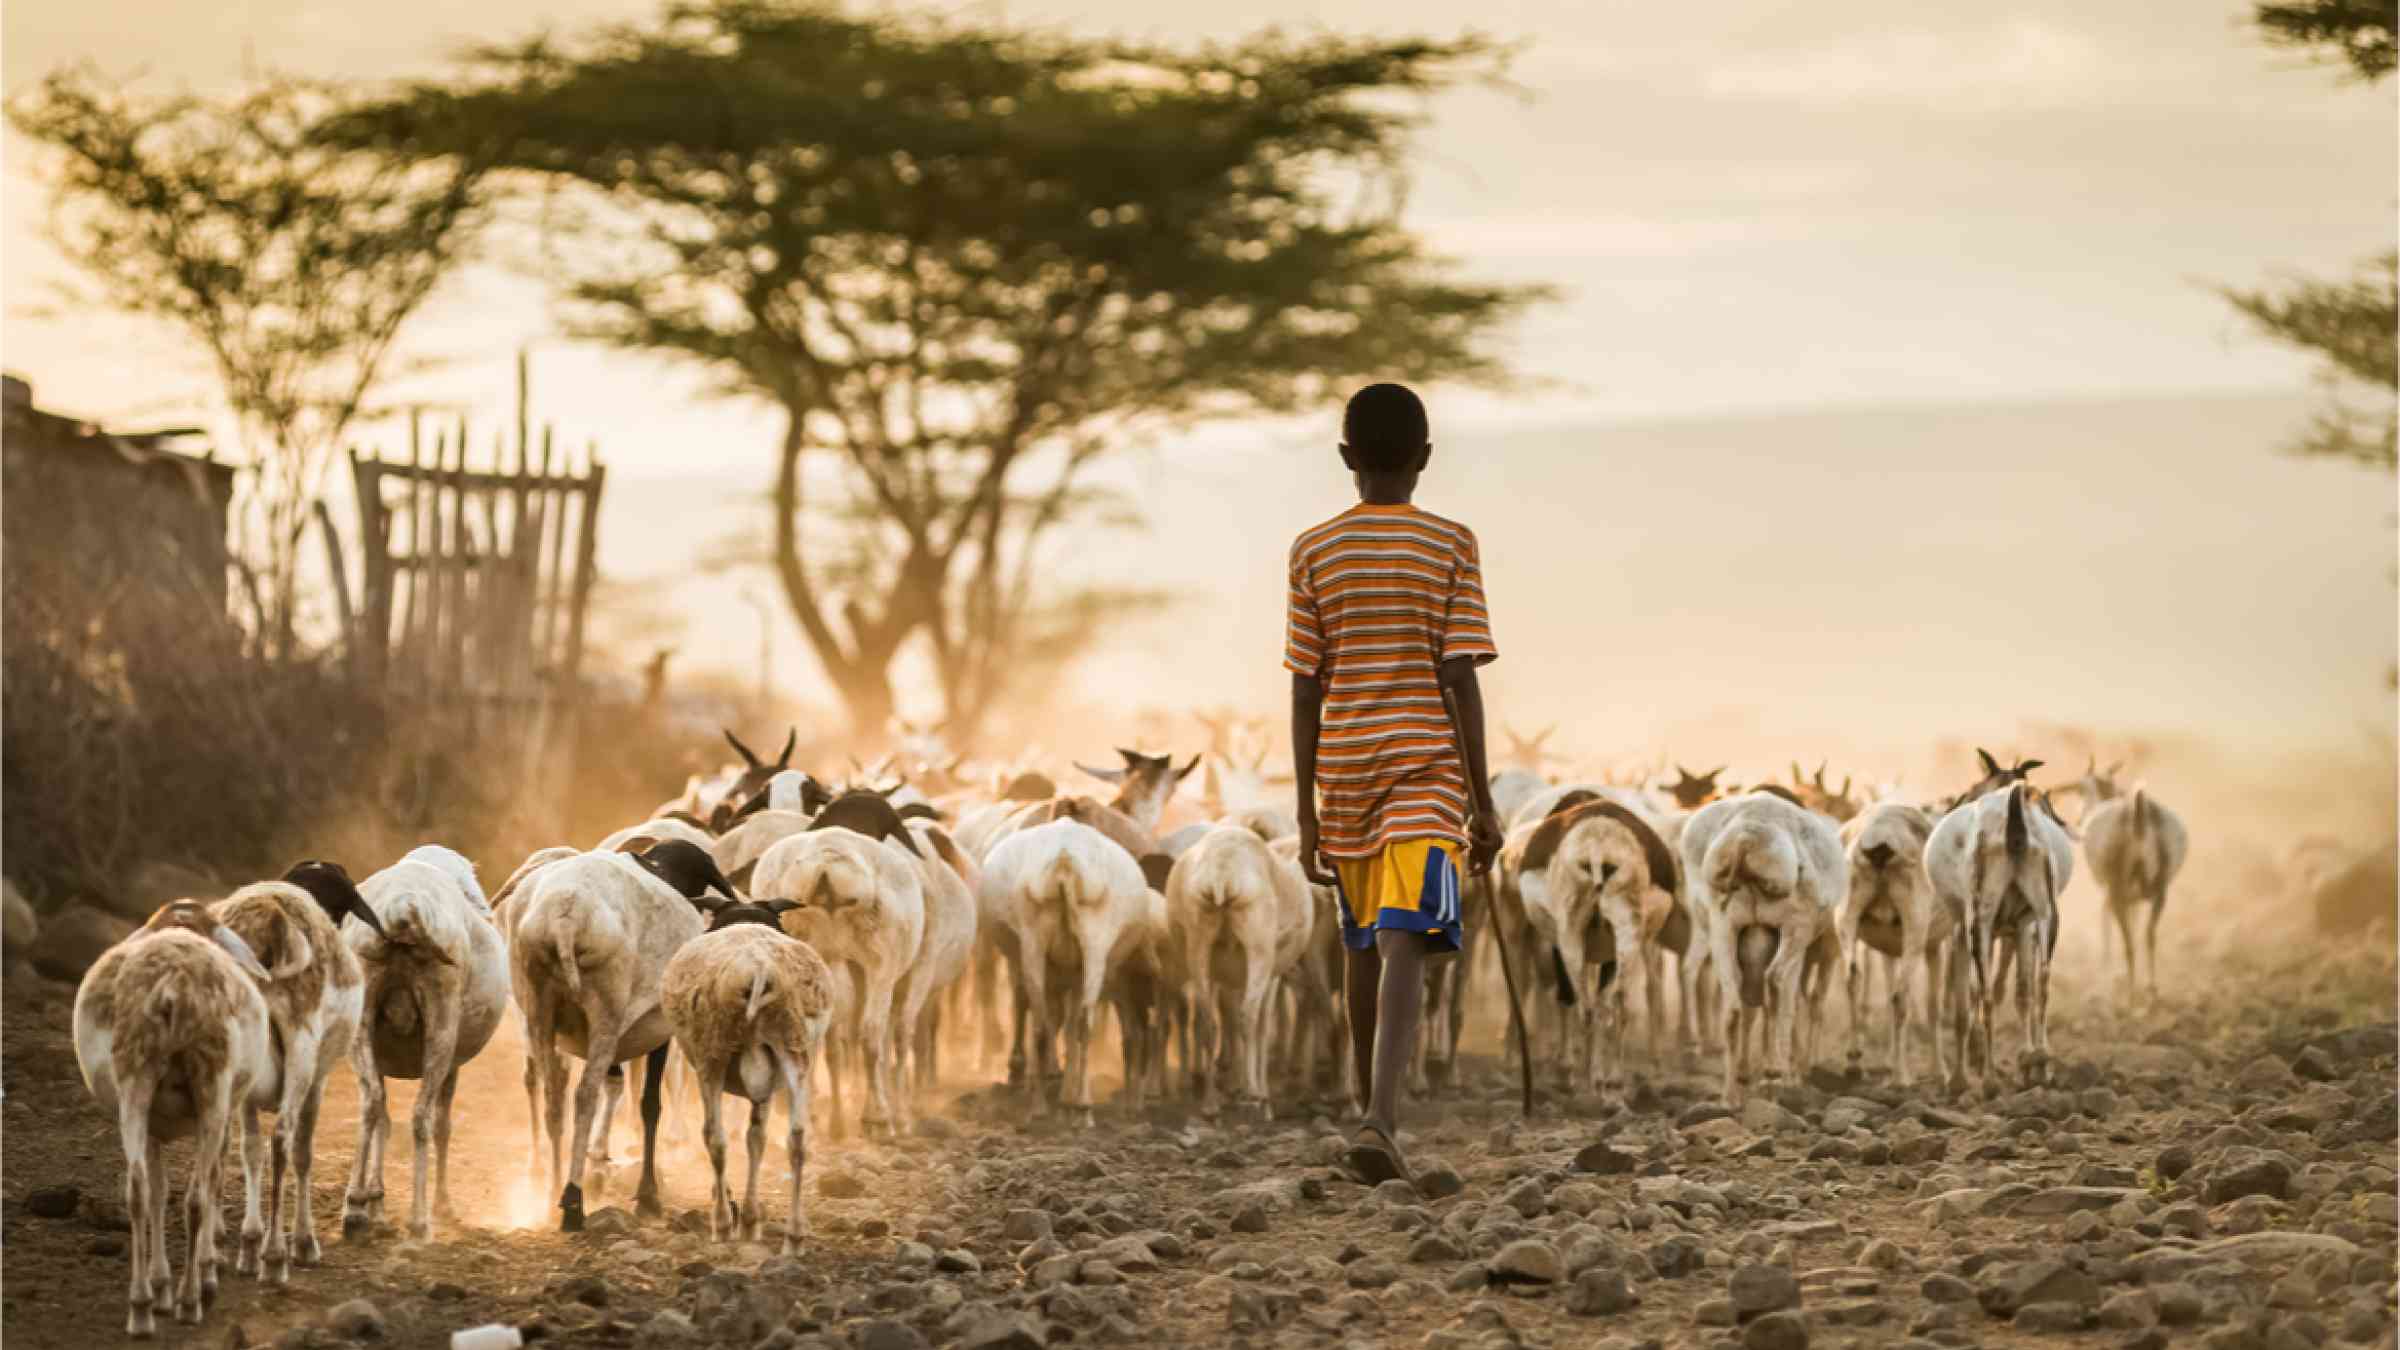 This image shows an African boy walking along a sandy path with a herd of goats.